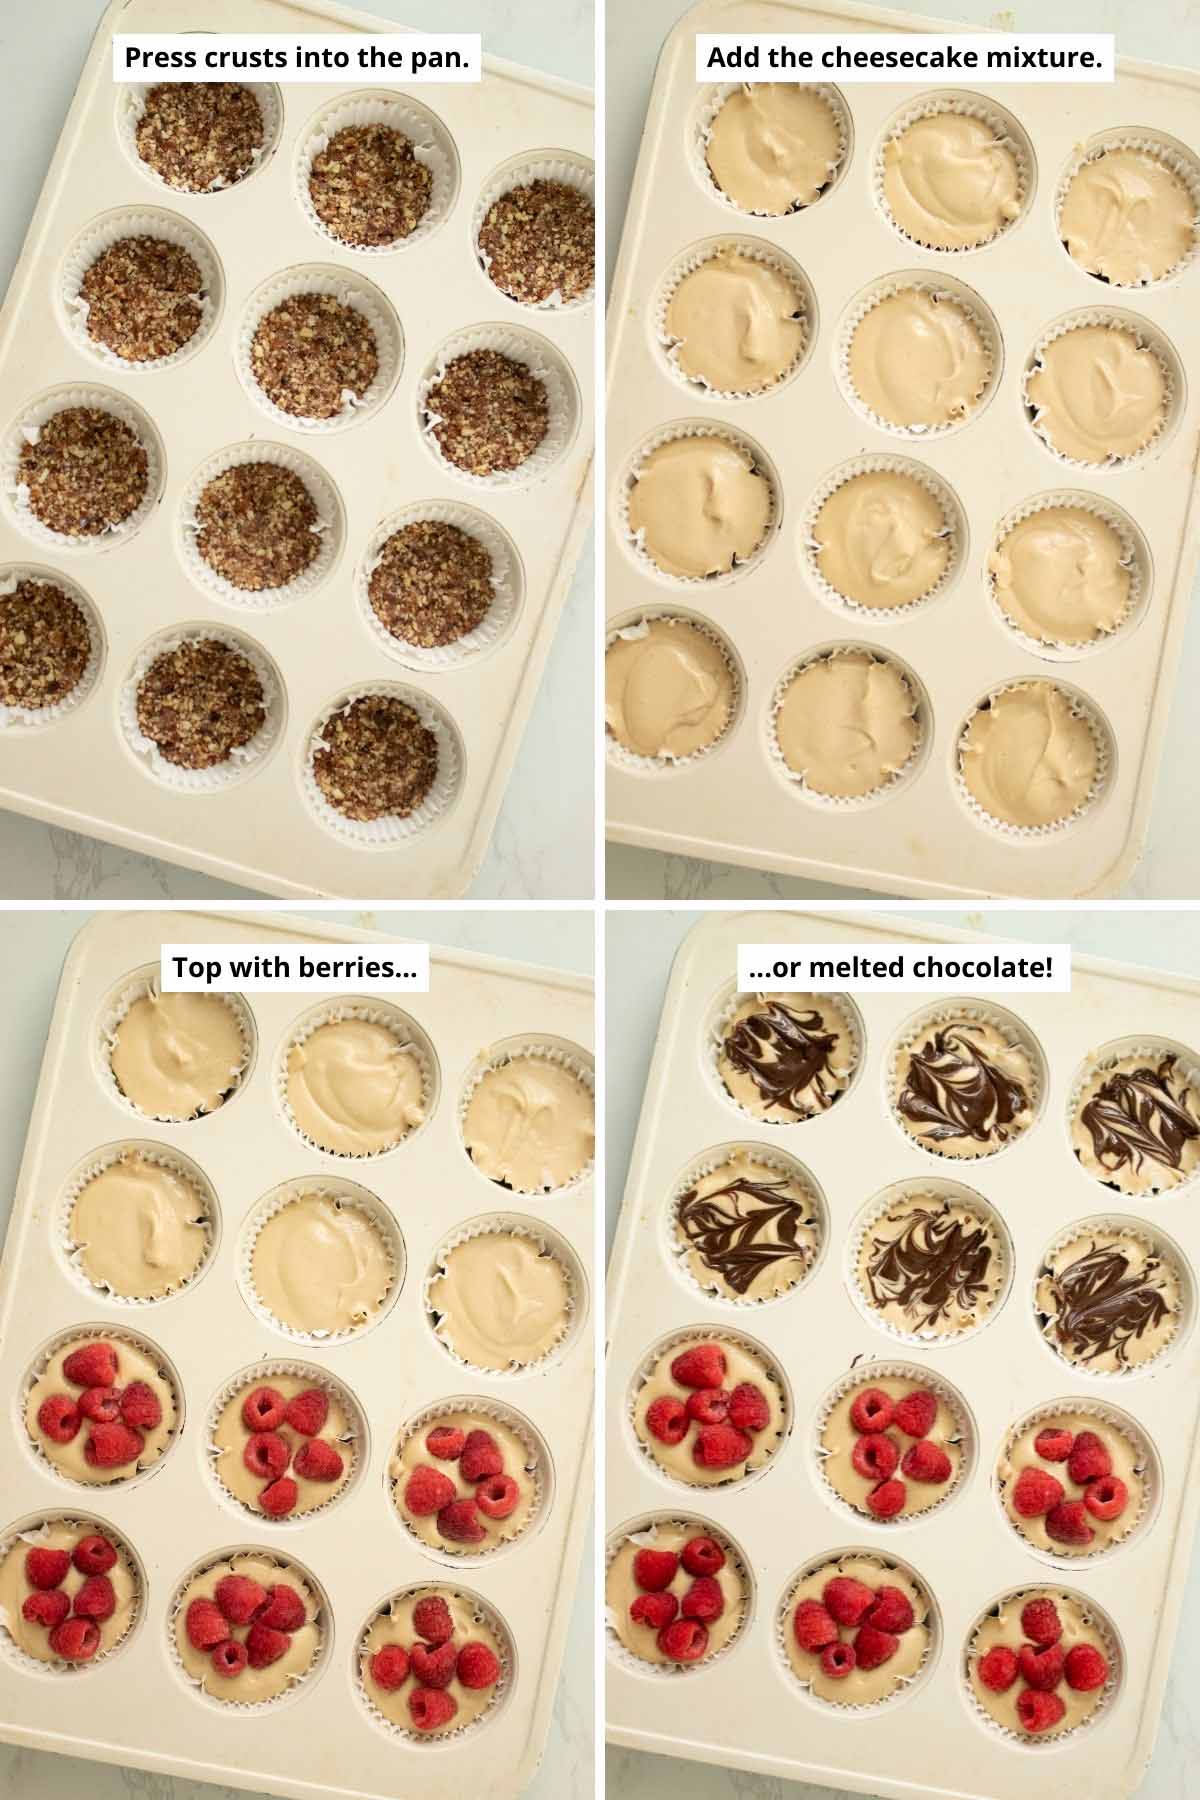 image collage showing the mini vegan cheesecake crusts in the muffin tin before and after adding the cheesecake mixture and adding berries and chocolate toppings